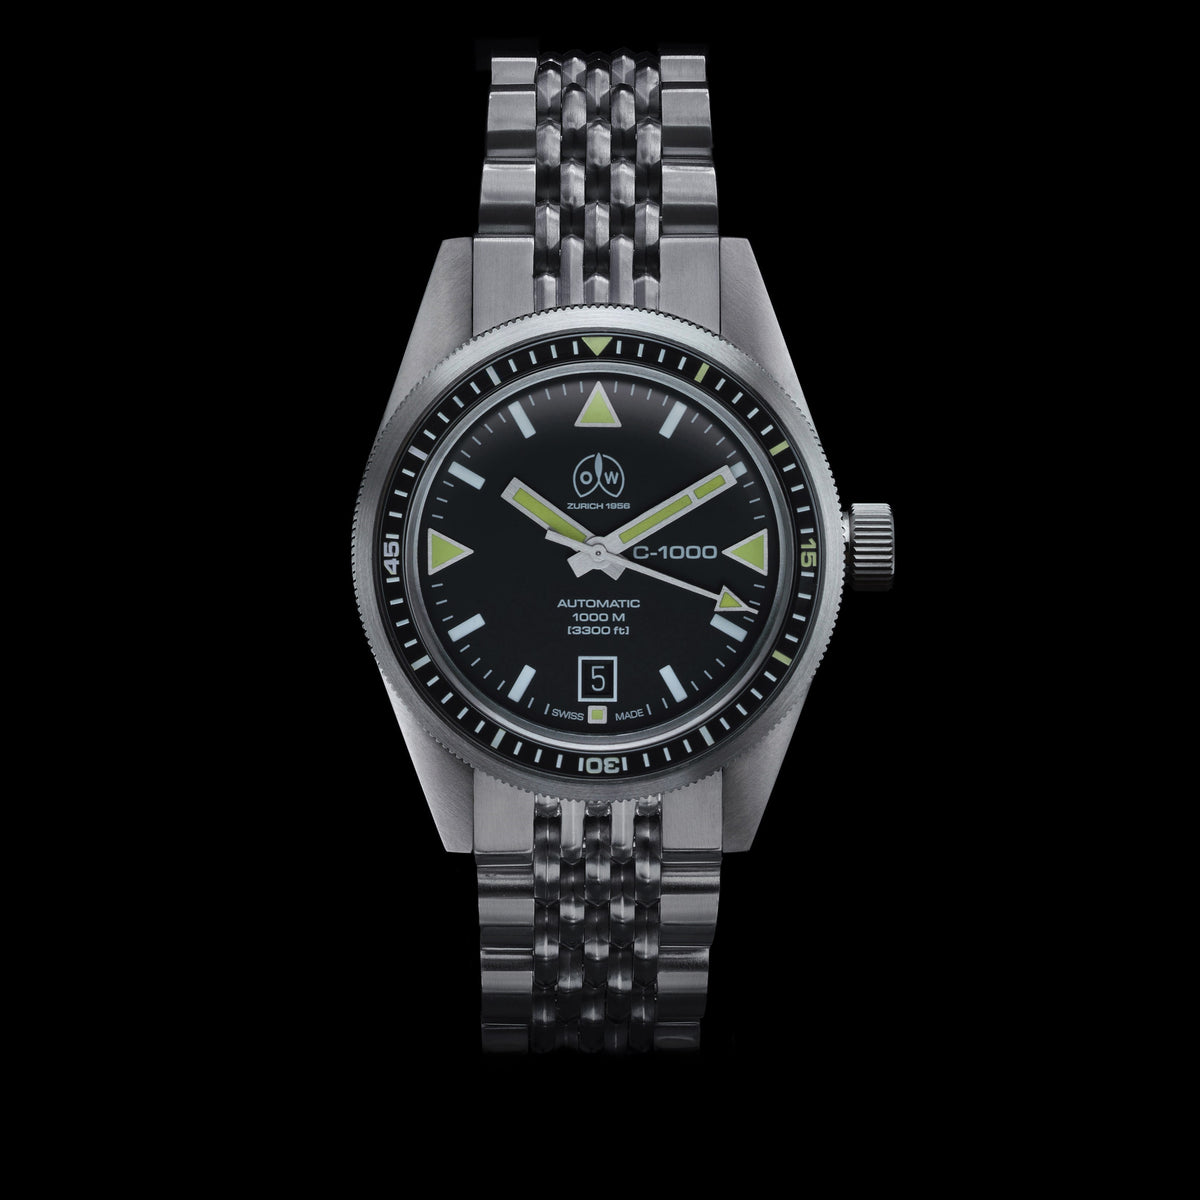 Ollech-and-Wajs-OW-C-1000-S-stainless-steel-bracelet-dive-watch-front_1200x.jpg